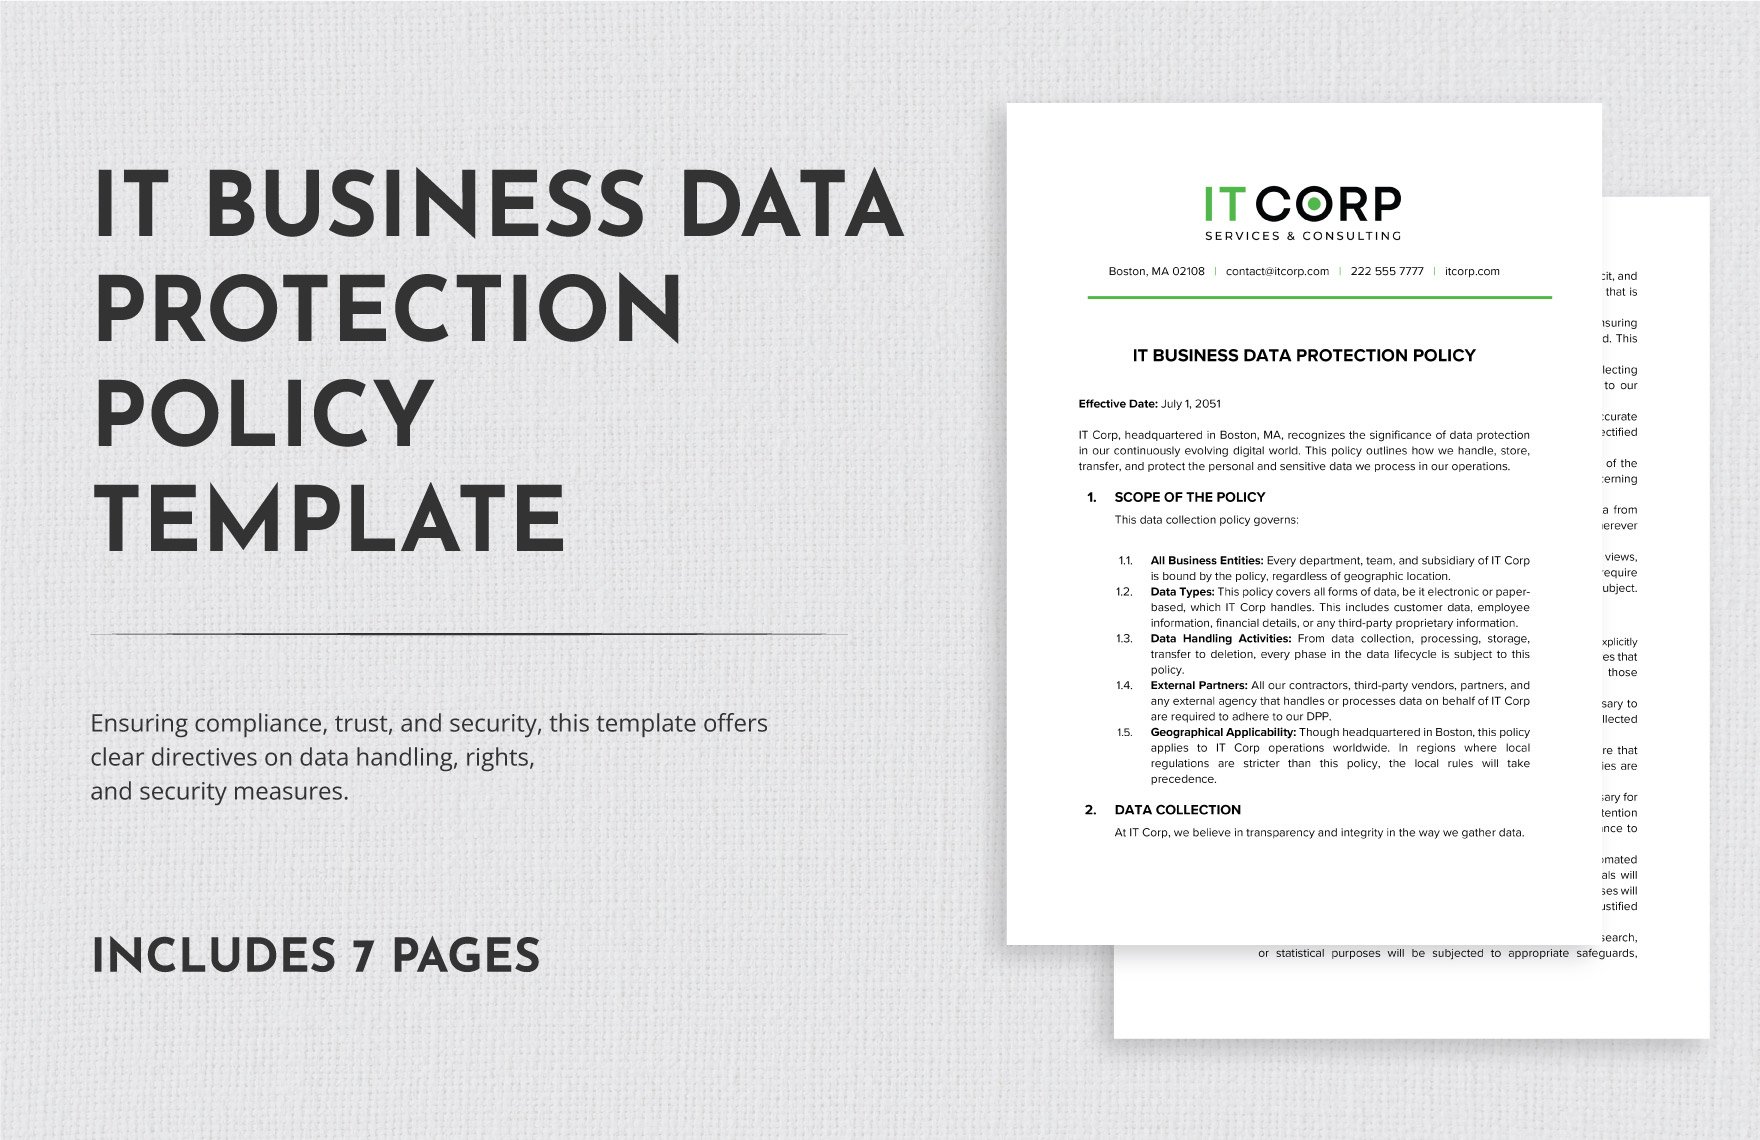 IT Business Data Protection Policy Template